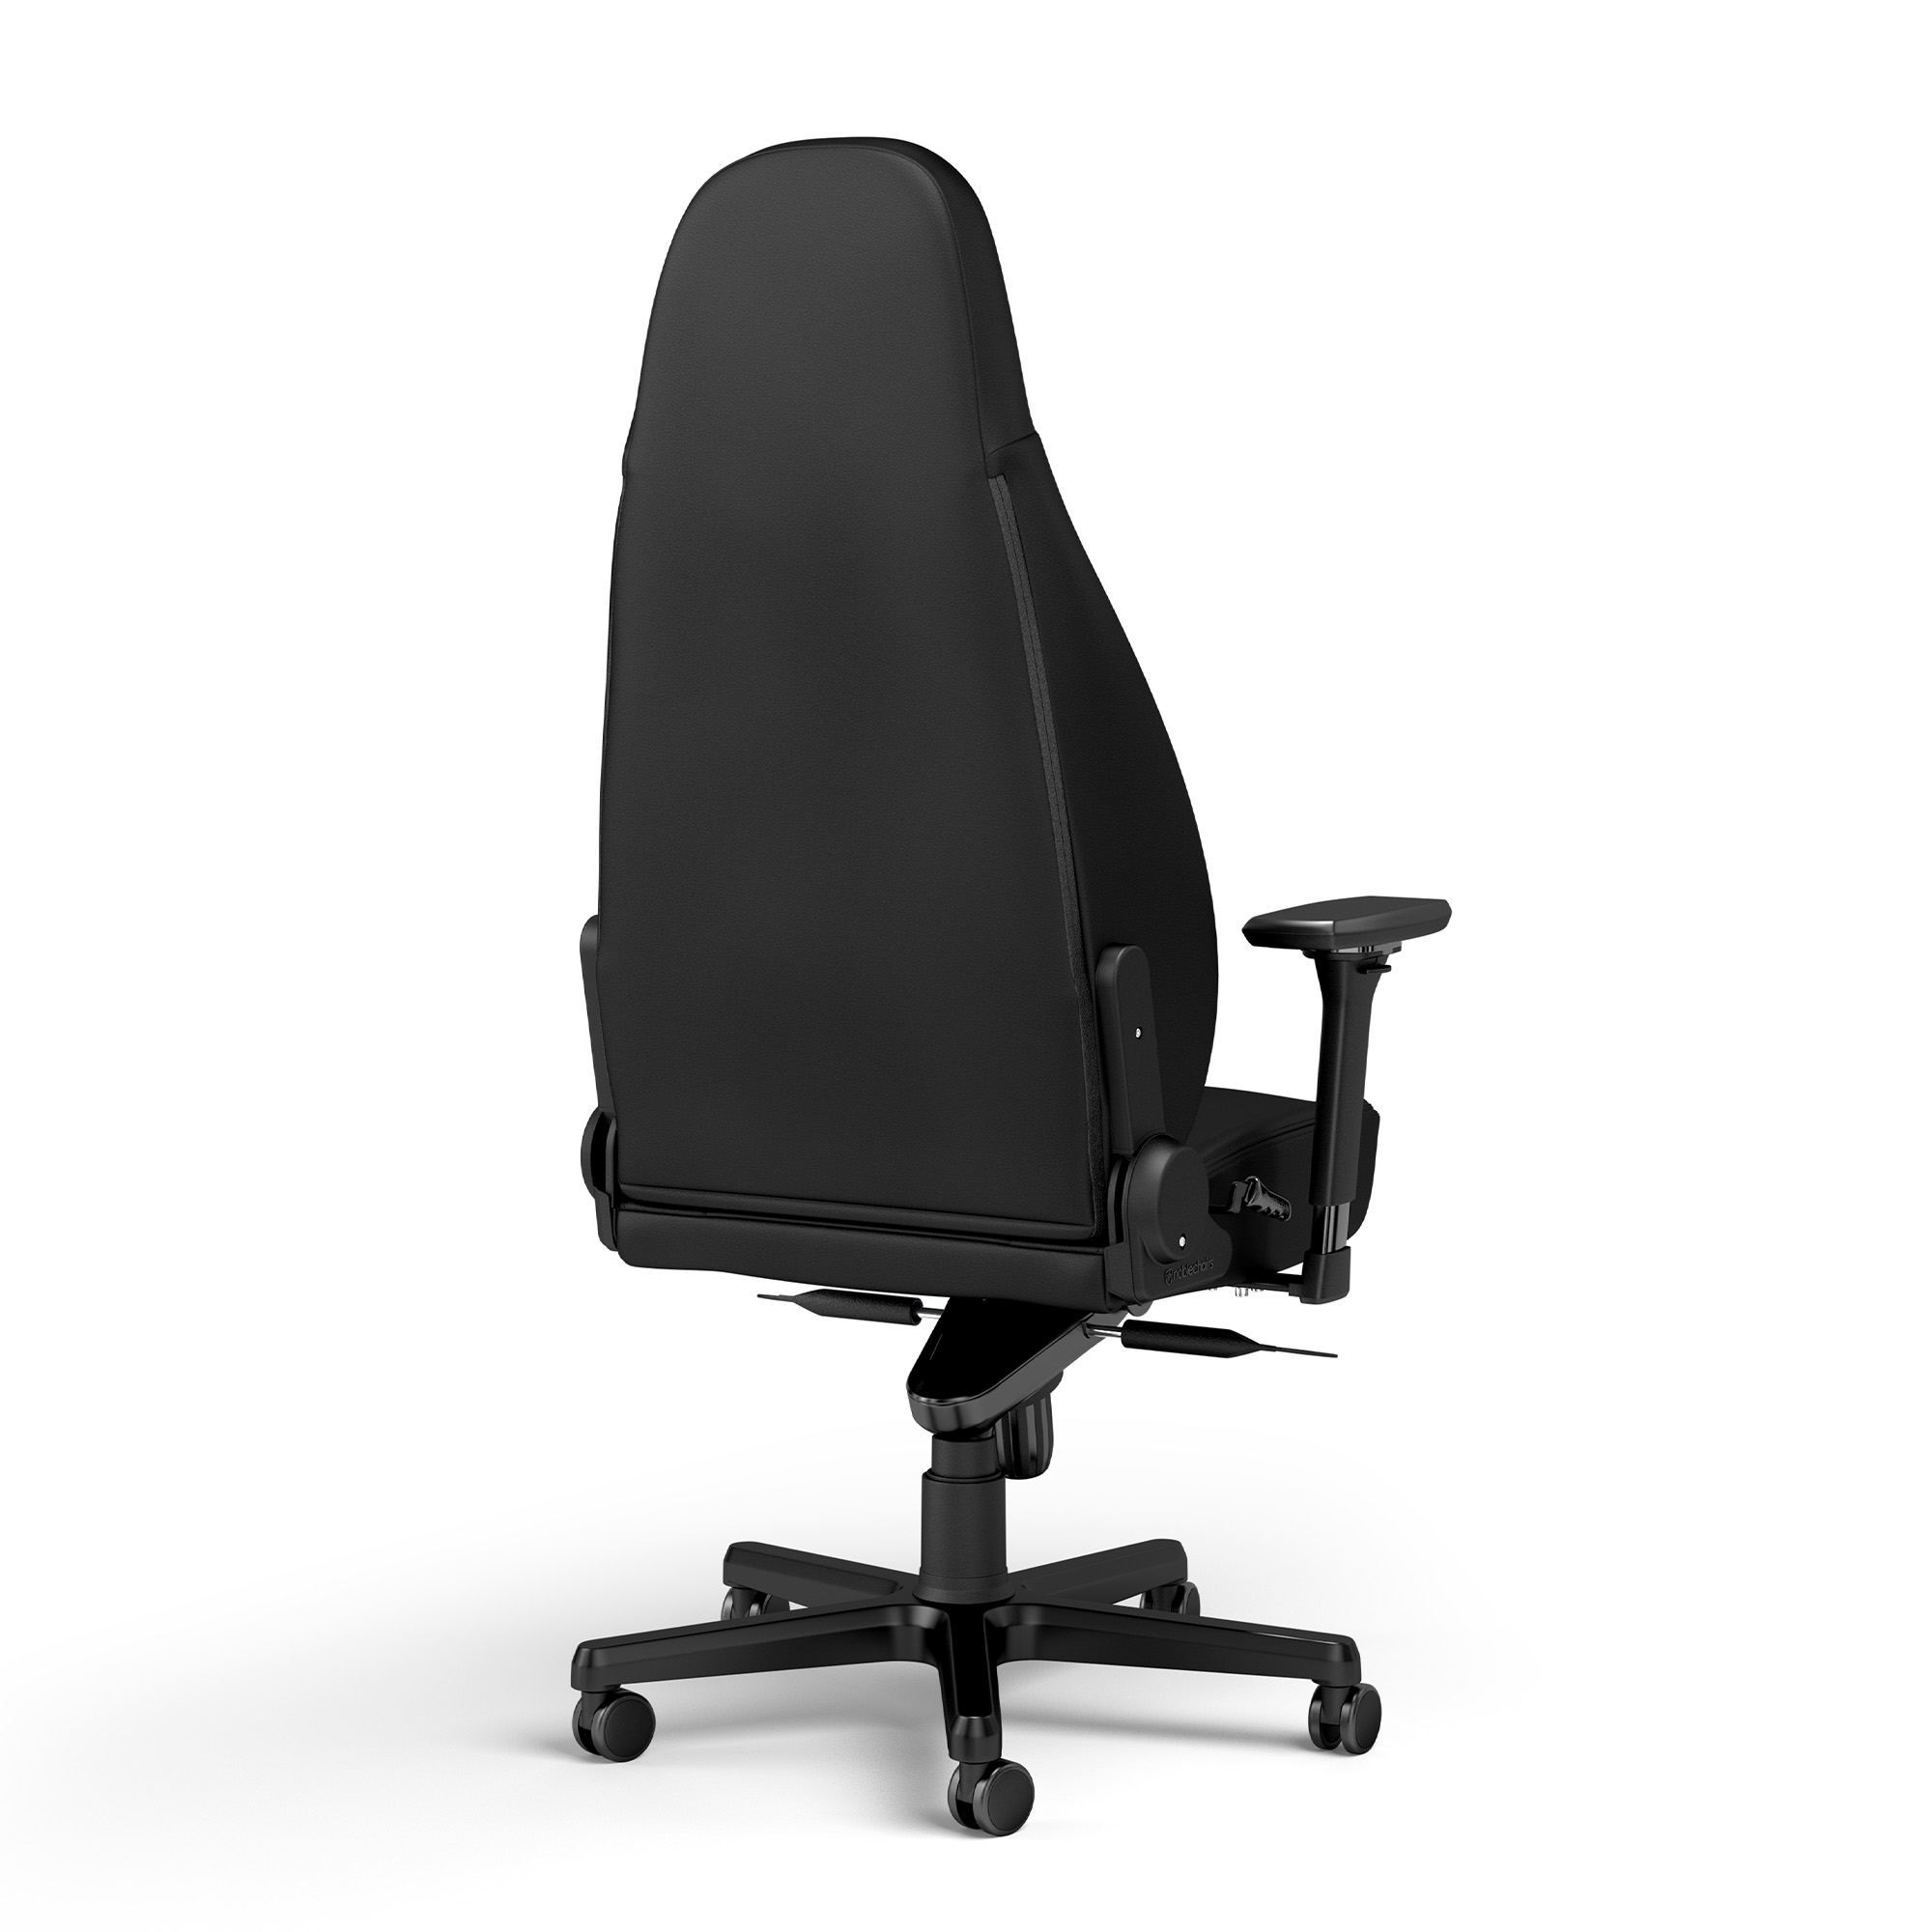 noblechairs - noblechairs ICON Gaming Chair - Black Edition